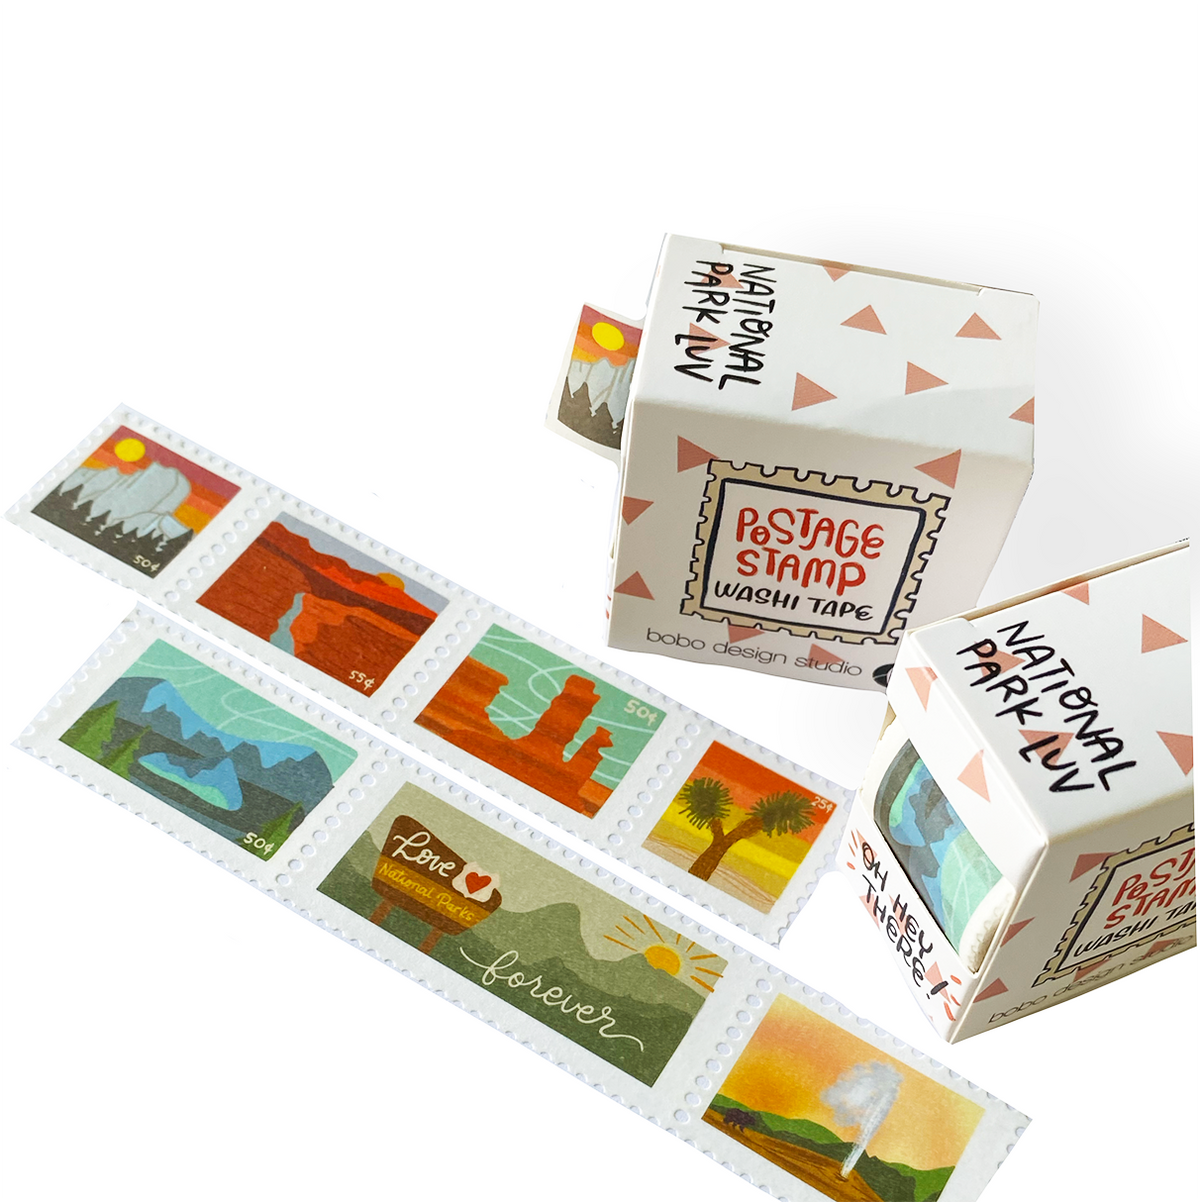 National Park Luv Postage Stamp Washi Tape Bundle featuring all the bobo design studio washi tapes in the postage stamp style with a bundle discount